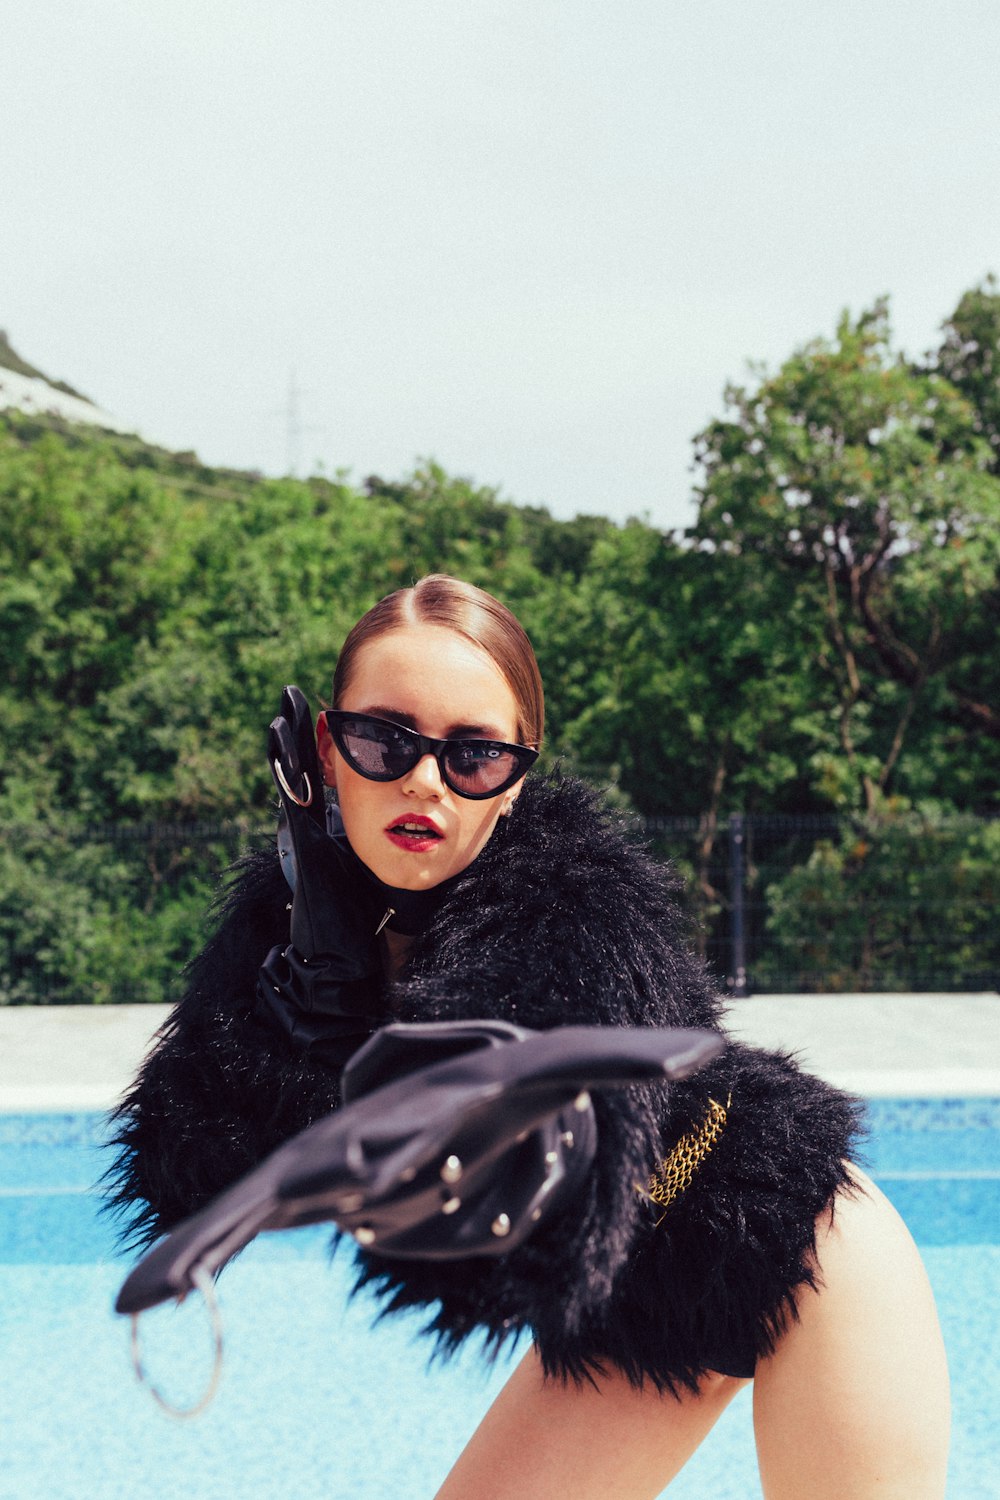 a person wearing sunglasses and a fur coat by a pool